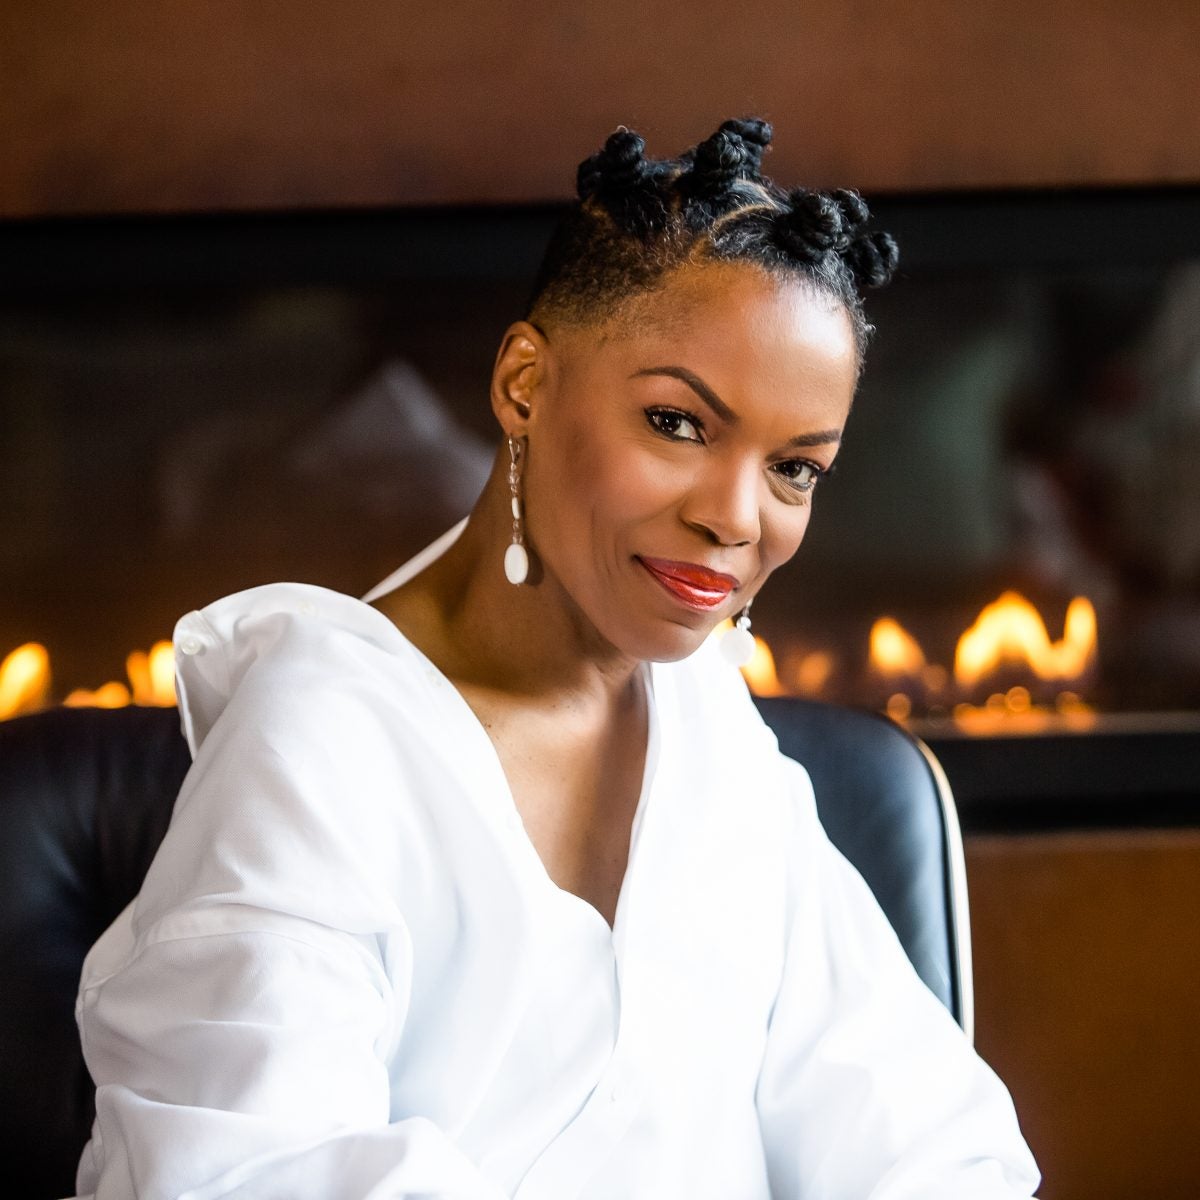 After Losing Her Husband And Sister, Jazz Singer Nnenna Freelon Chronicles Loss In 'Great Grief' Podcast, New Album